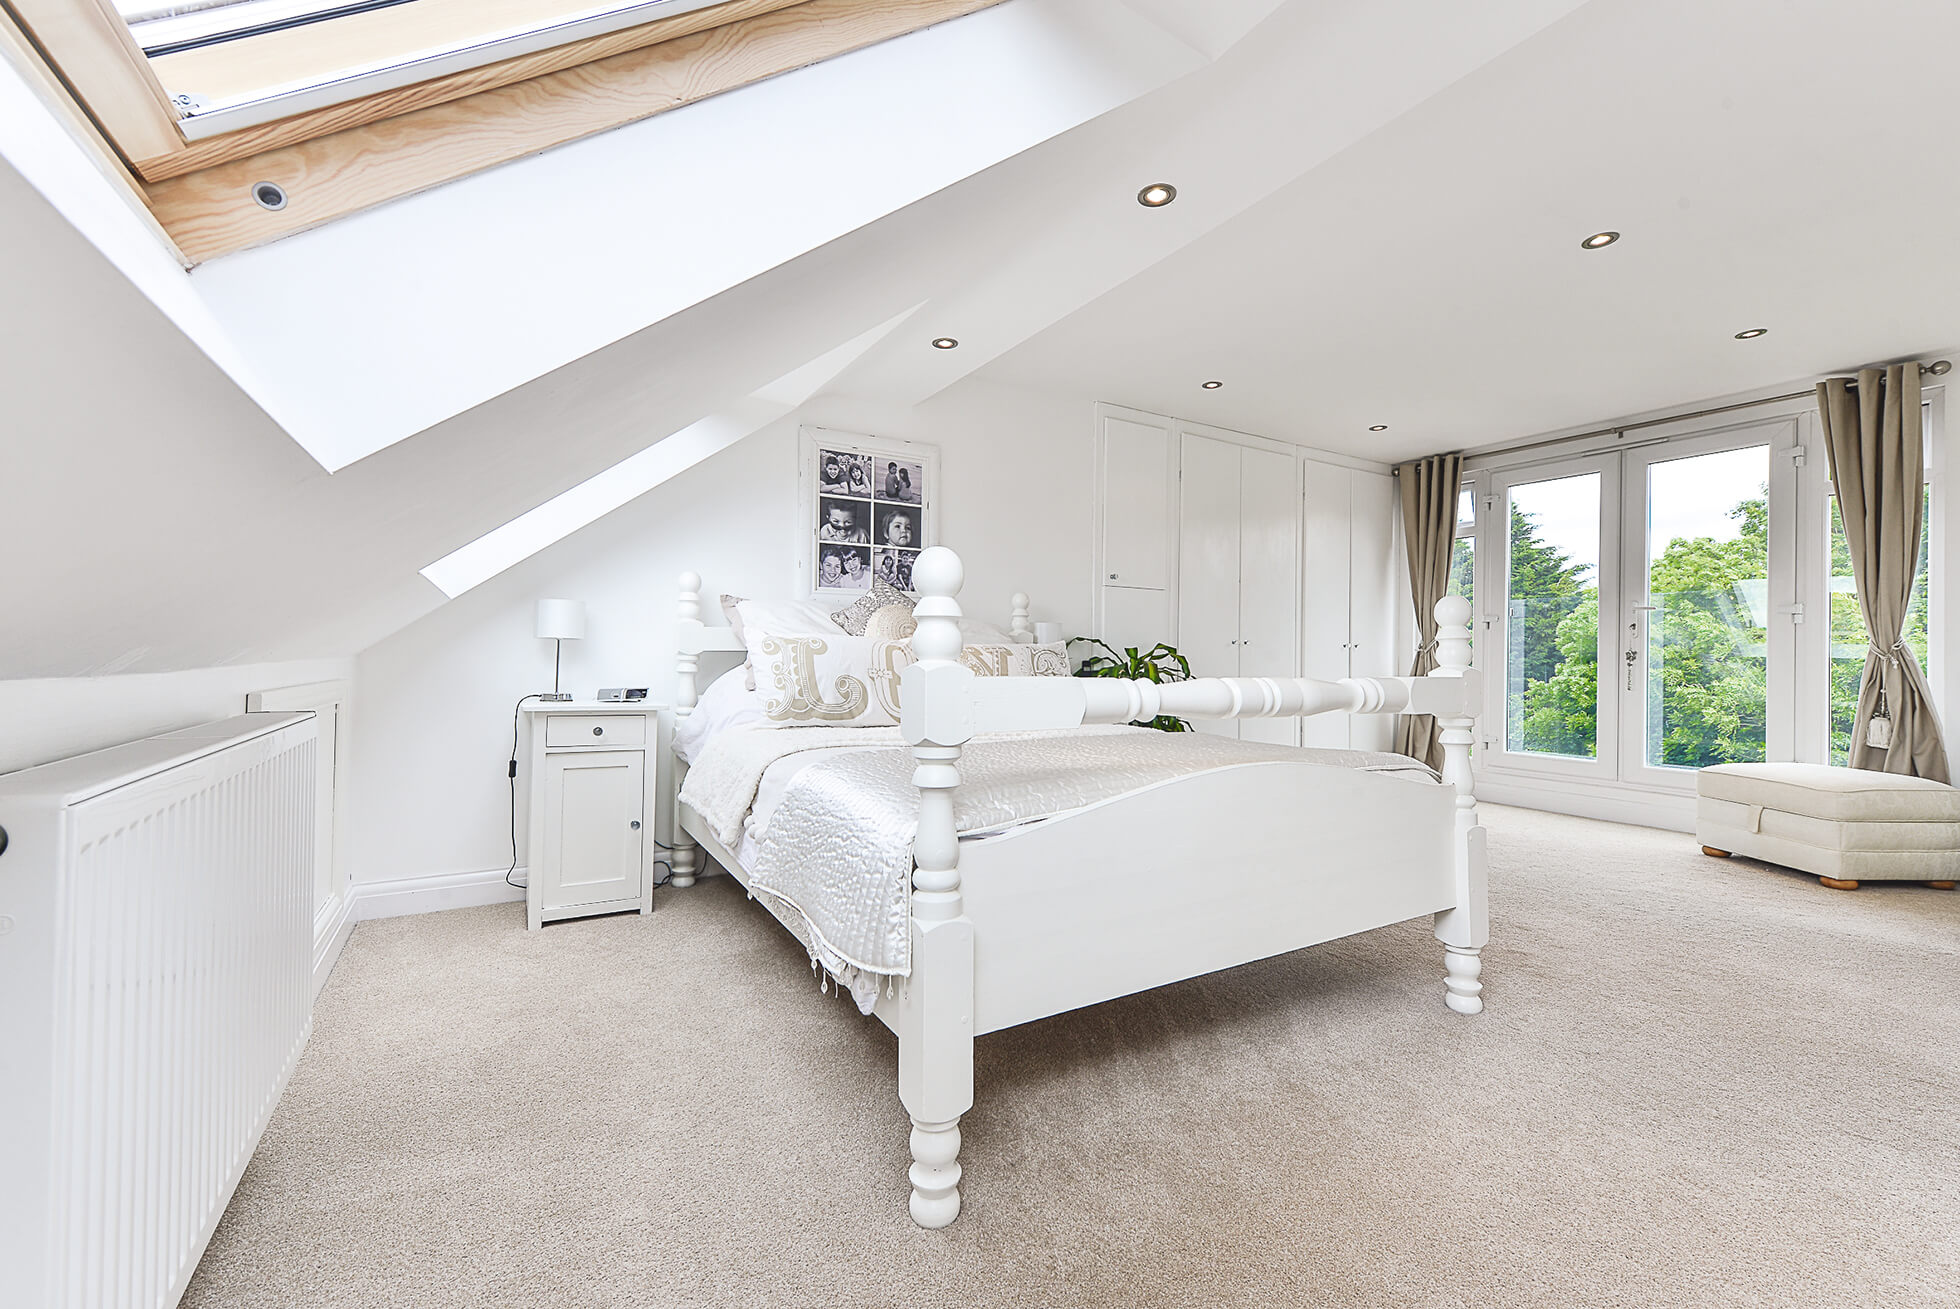 Do you have a question about converting your Loft in Colney Street? Here are the most popular questions asked by our clients.